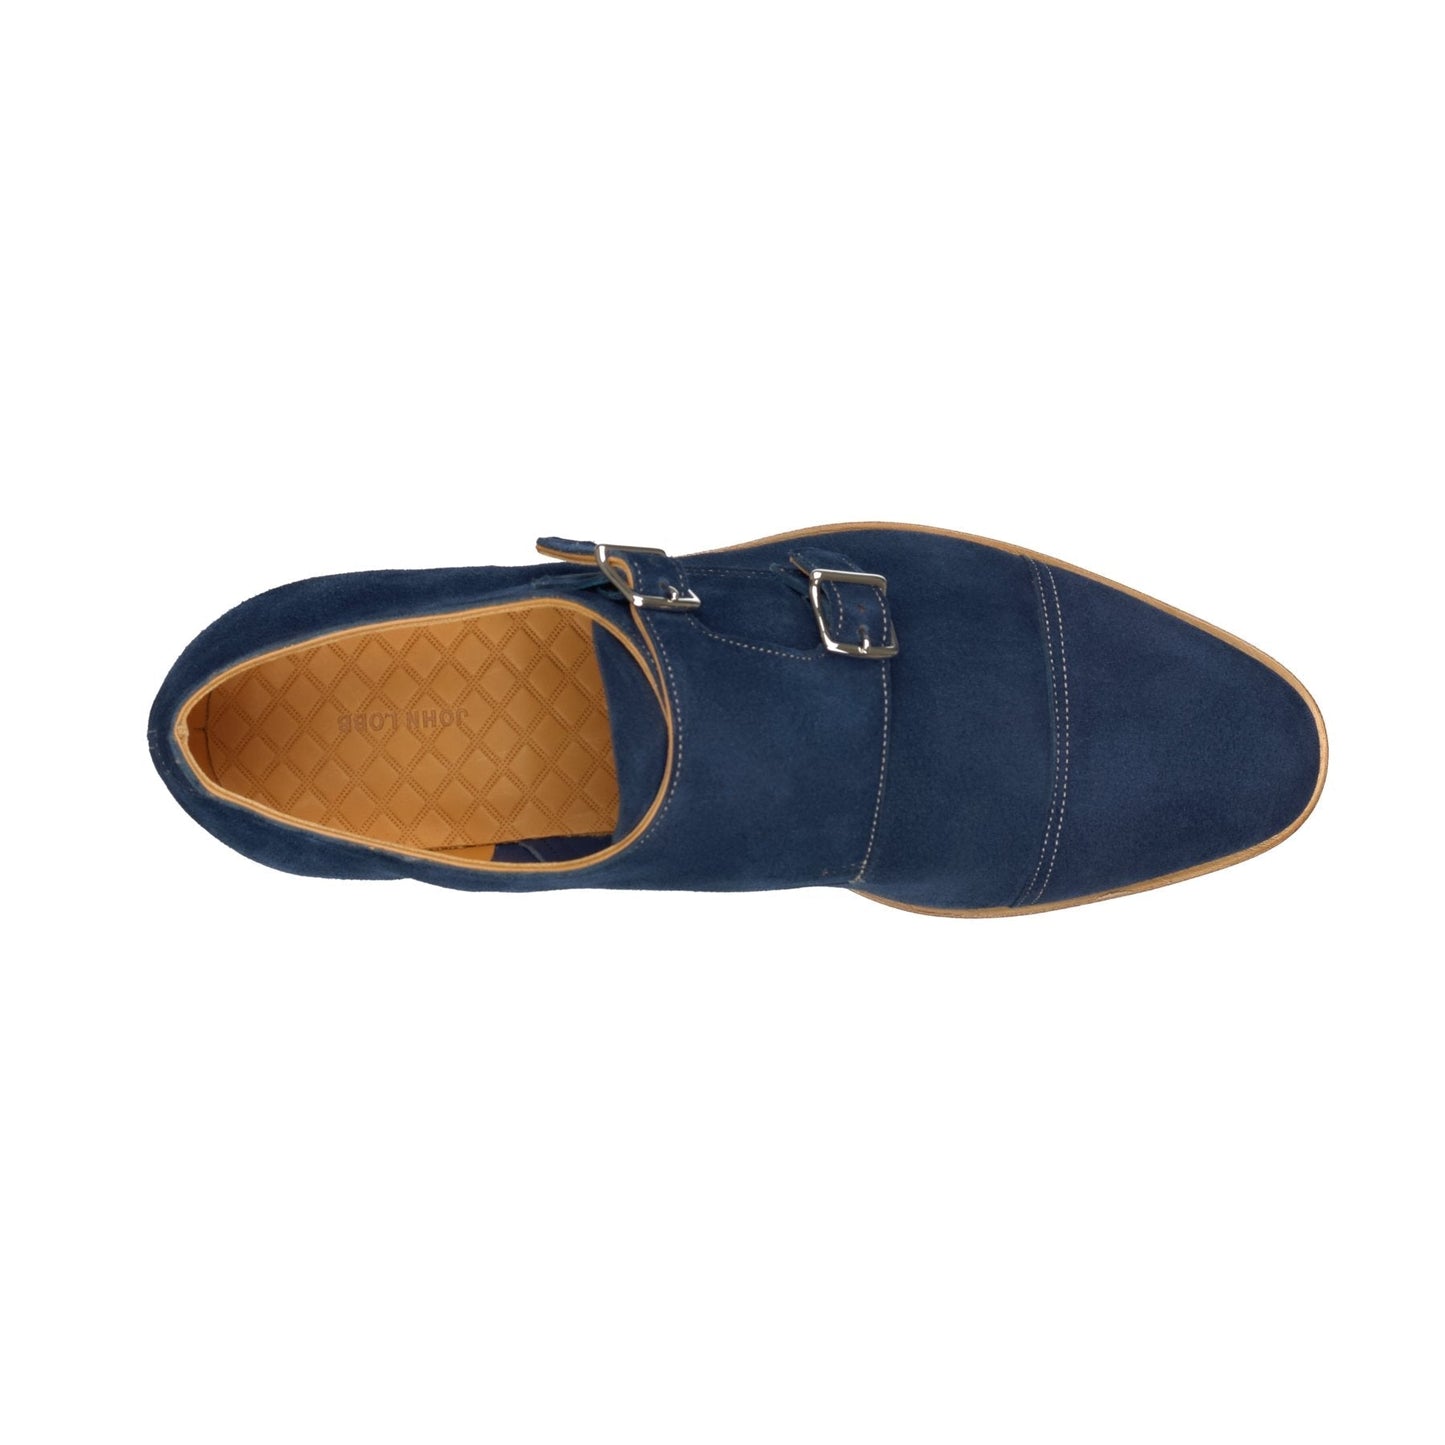 John Lobb "William" Suede Double-Monk Shoes with Hand-Stitched Cap Toe in Royal Blue - SARTALE